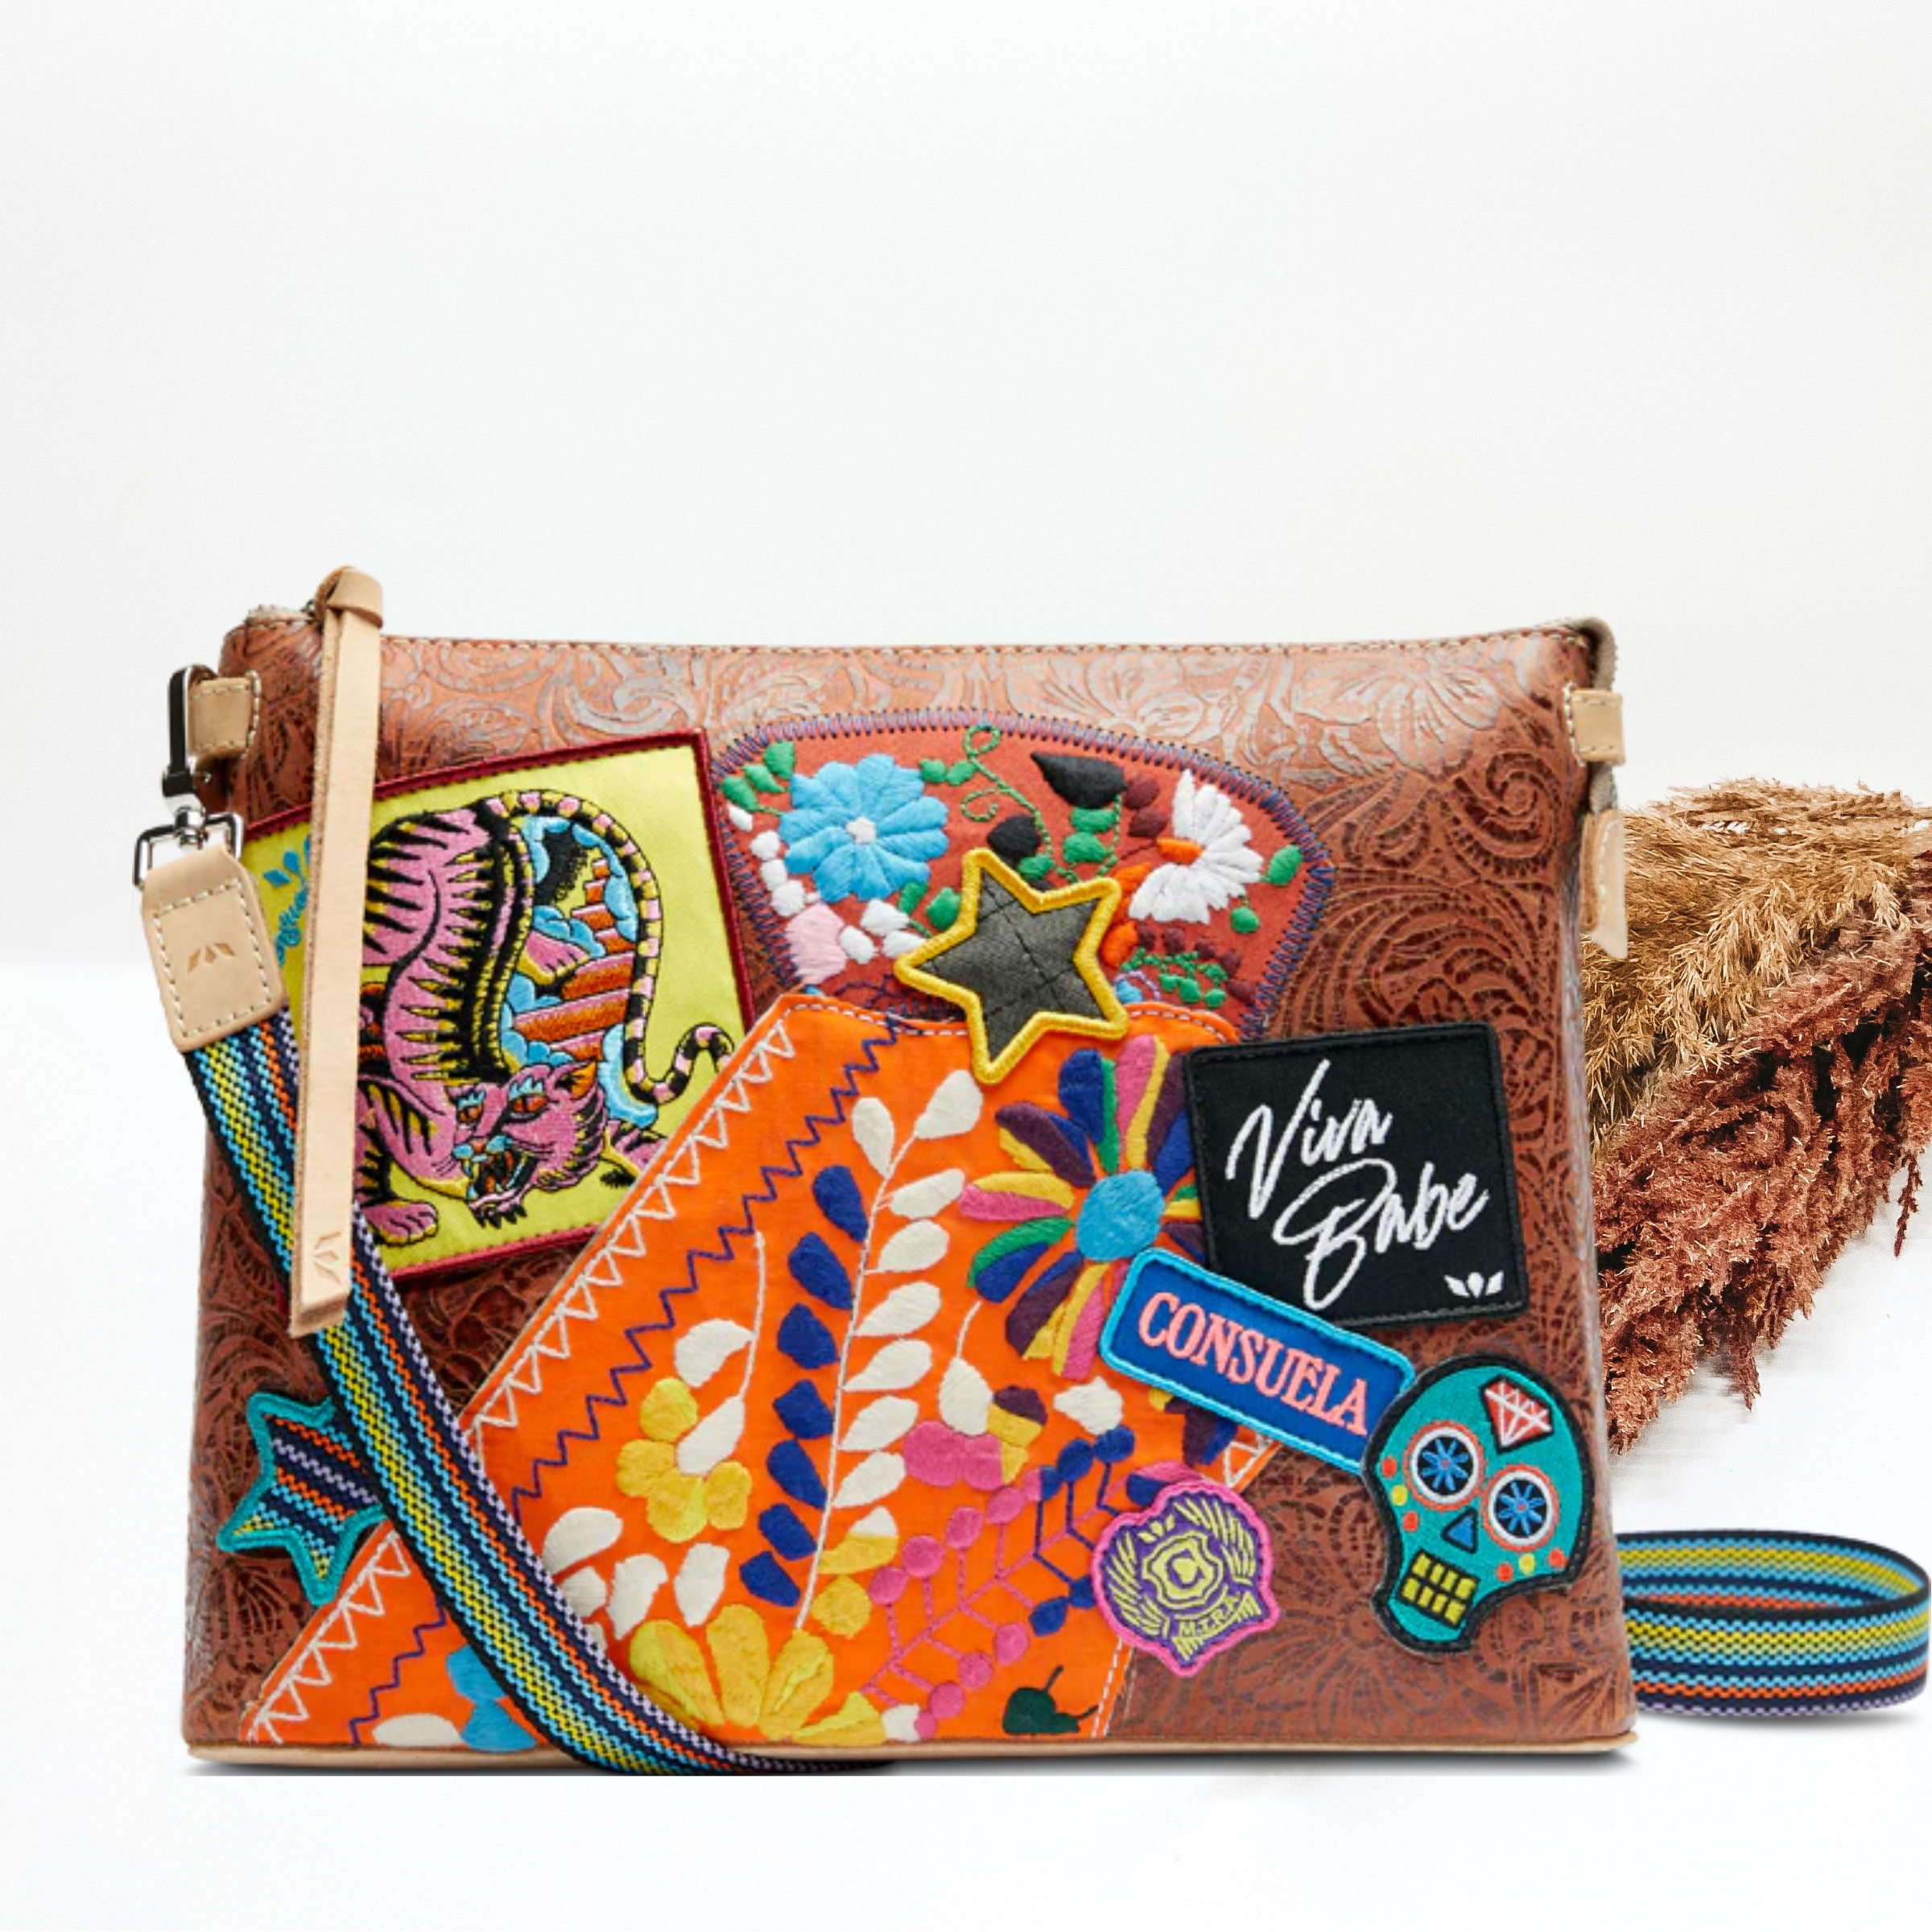 A leather tooled print purse with colorful patches and a crossbody strap. Pictured on white background with brown pompous grass on the right side. 